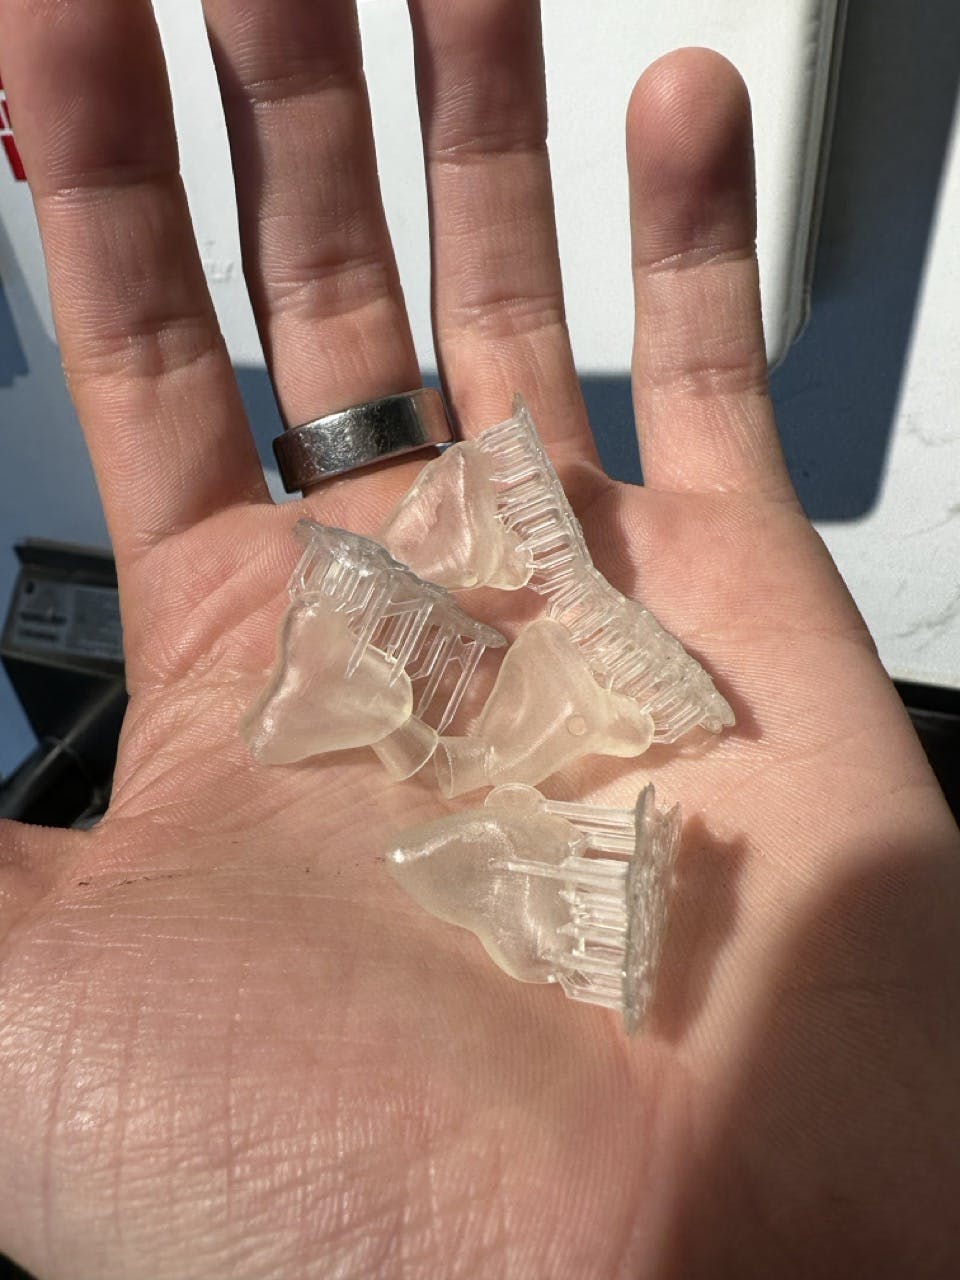 Ear plug mold shells in the palm of a hand